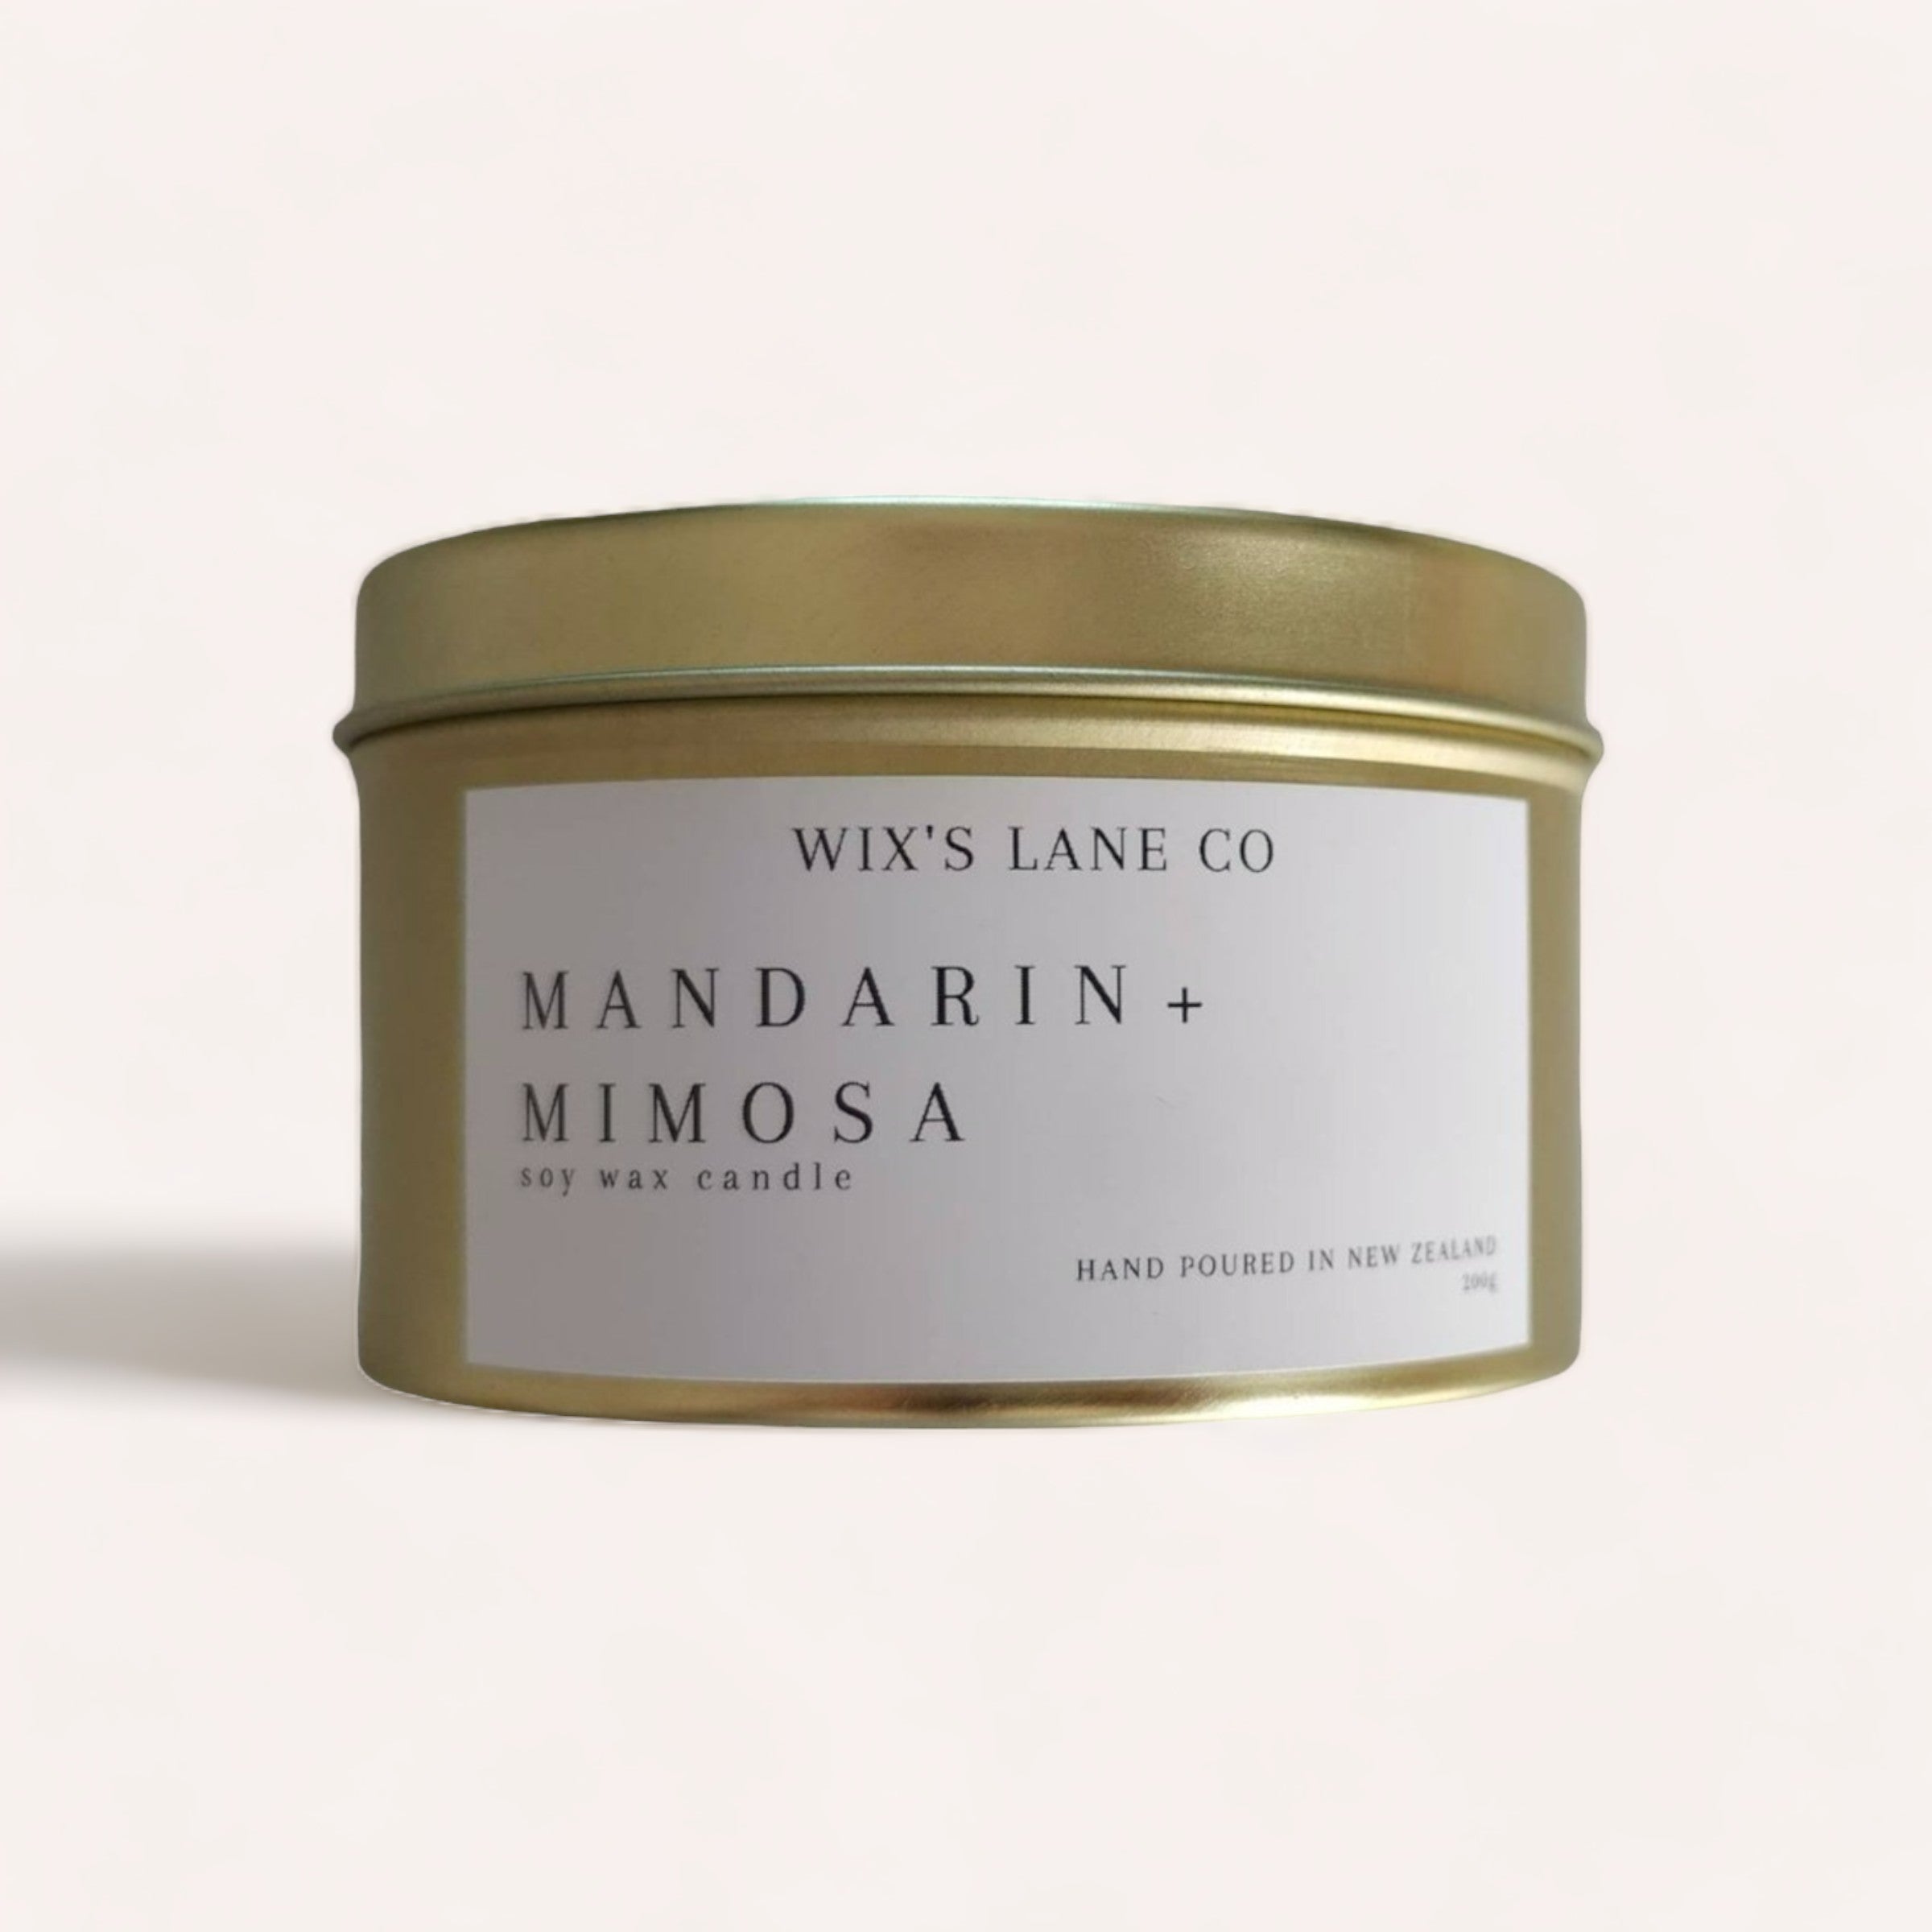 mandarin & mimosa soy wax candle by wix's lane co